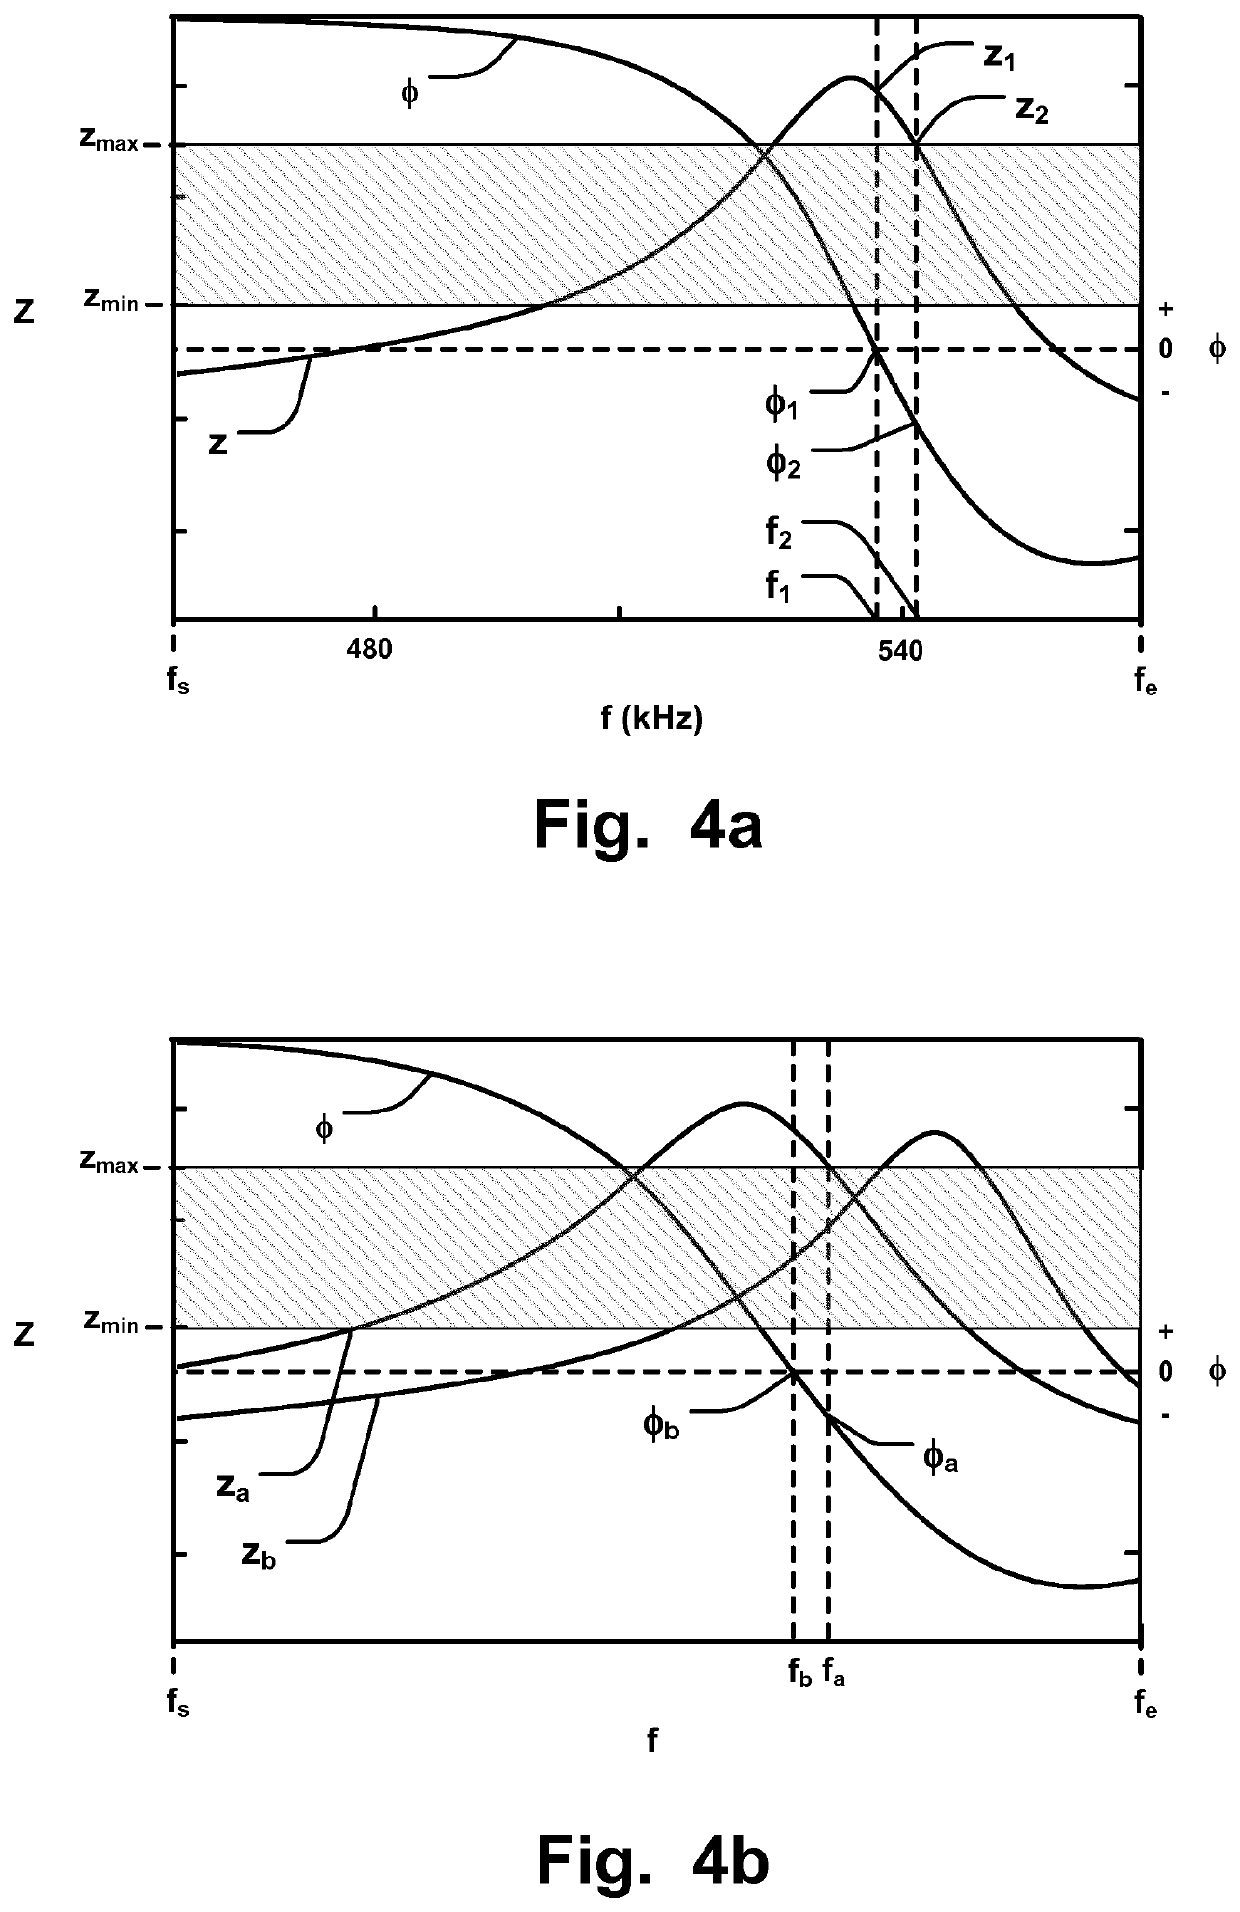 Method of controlling an inductive heating circuit to seal a packaging material